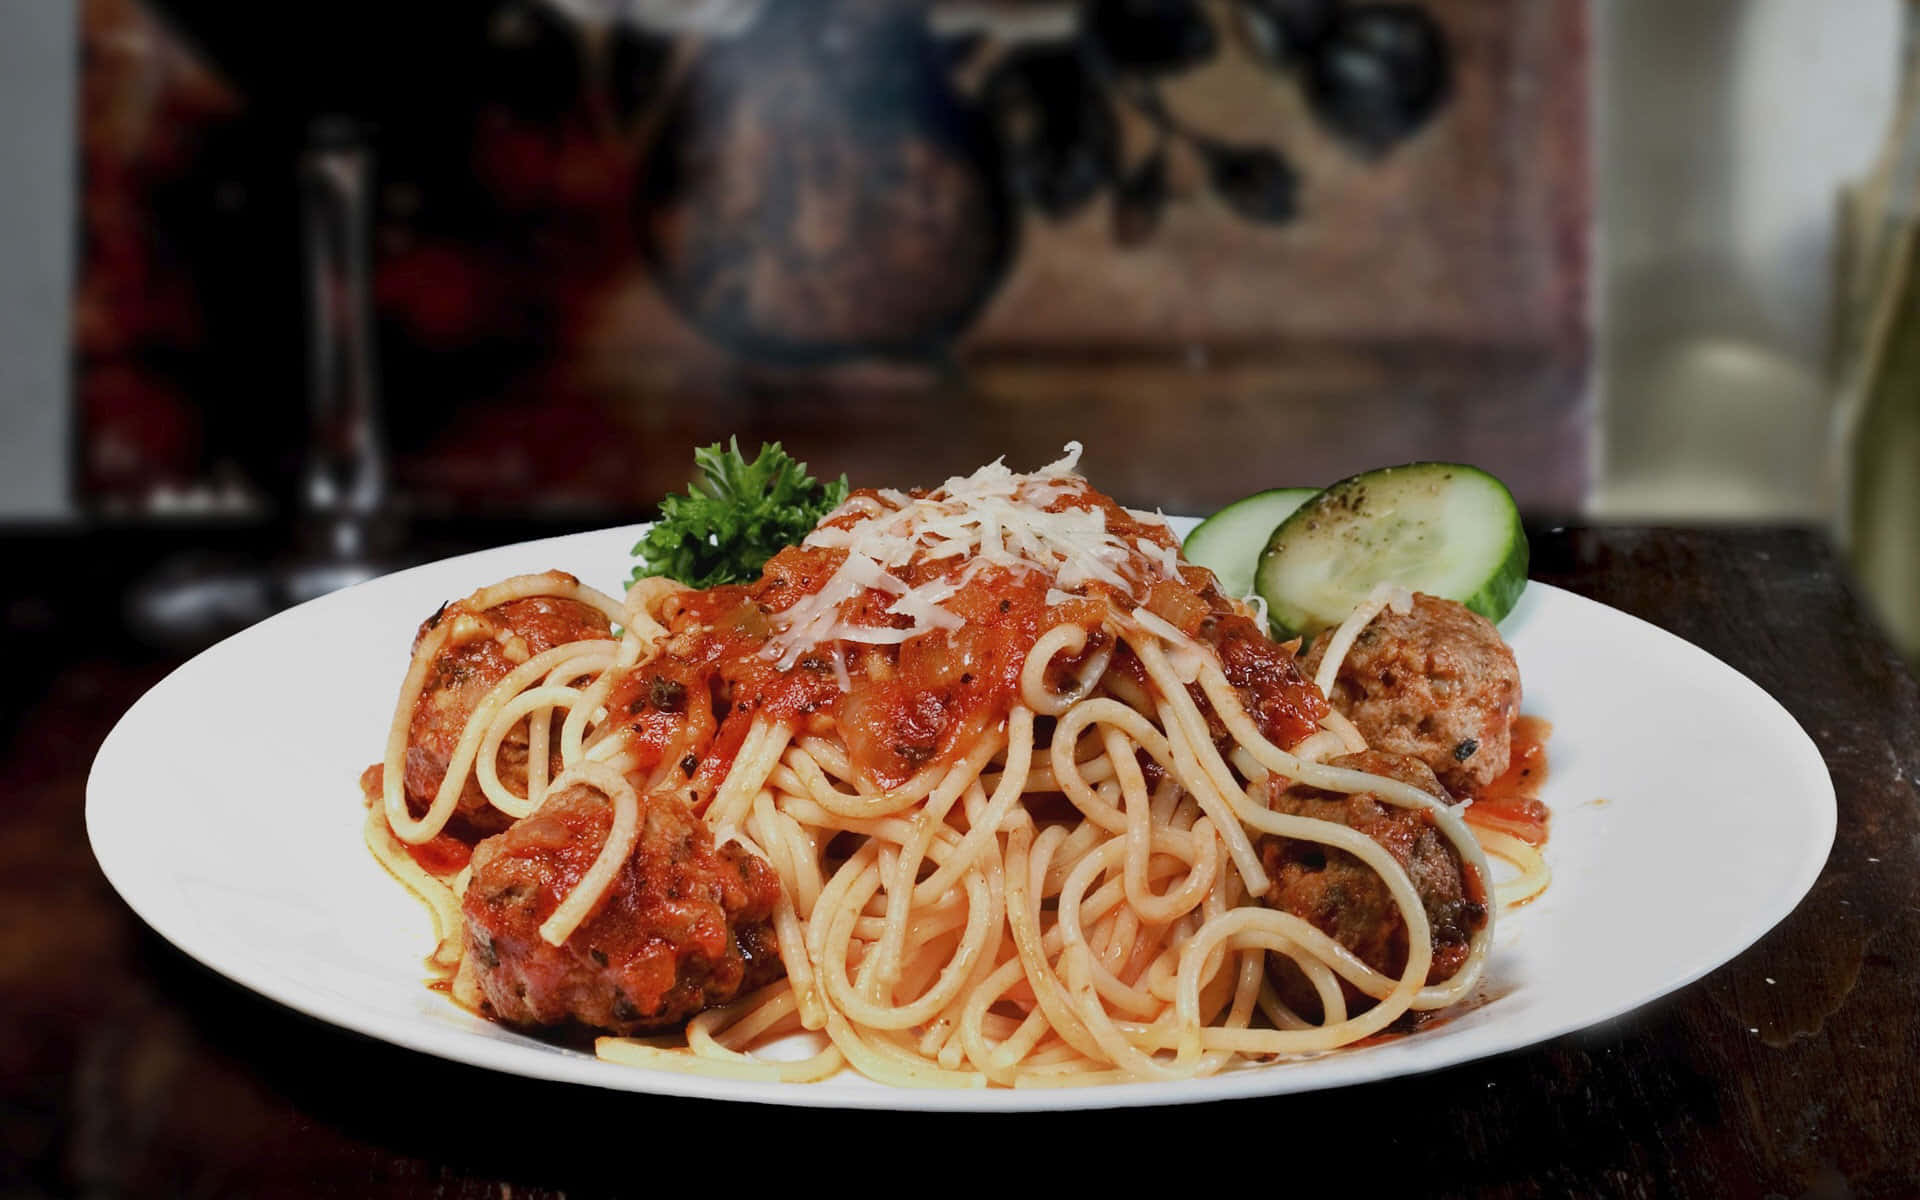 A Plate Of Spaghetti With Meatballs And Sauce